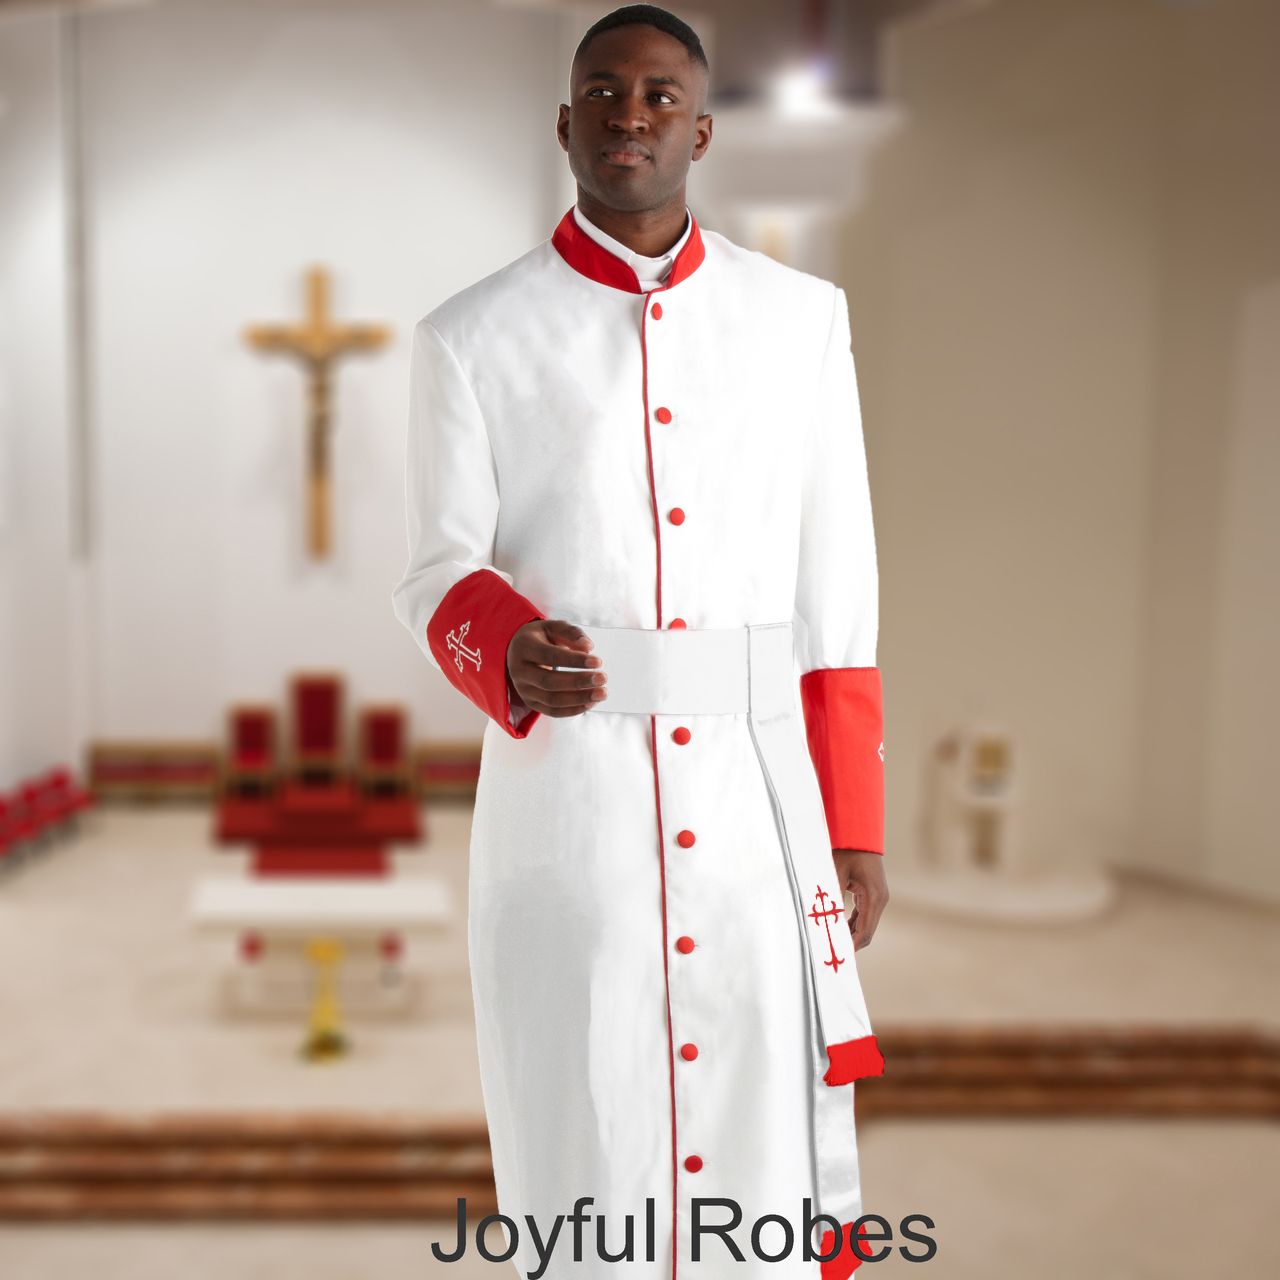 355 M. Men's Pastor/Clergy Robe - White/Red Cuff Matching Cincture Set